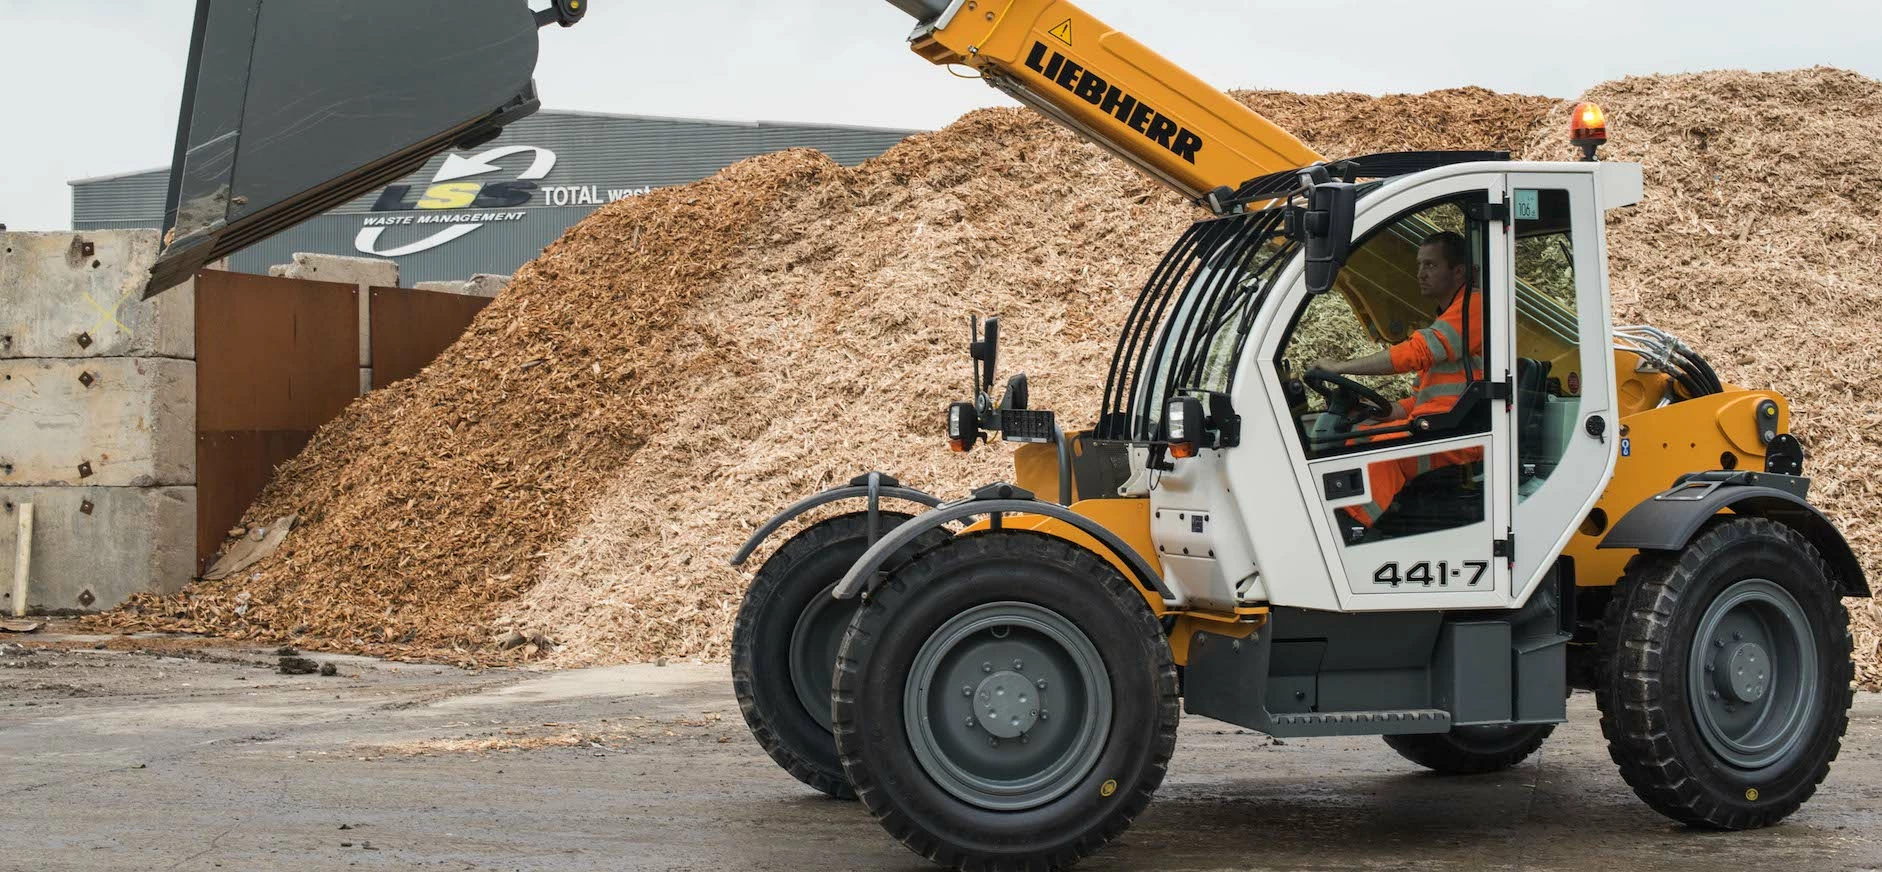 The new Liebherr TL441-7 Telehandler in operation at LSS Waste’s Biomass plant.